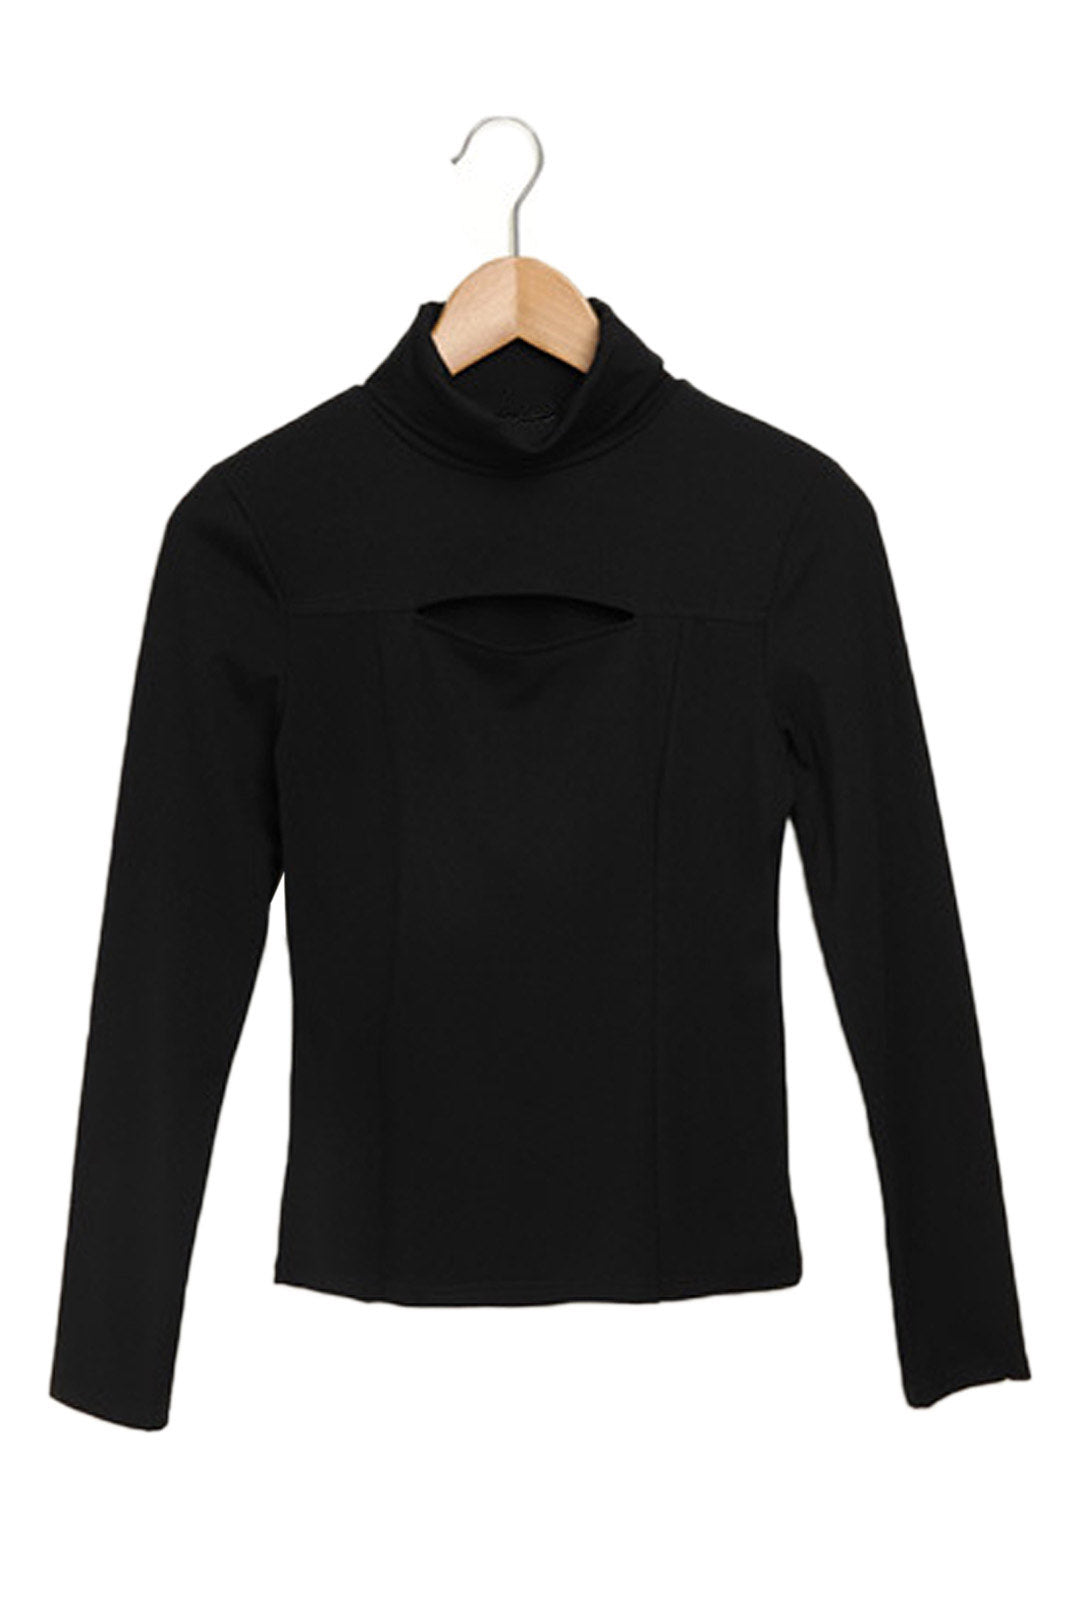 Wholesale Roll Neck Cut Out Long Sleeve Black Top